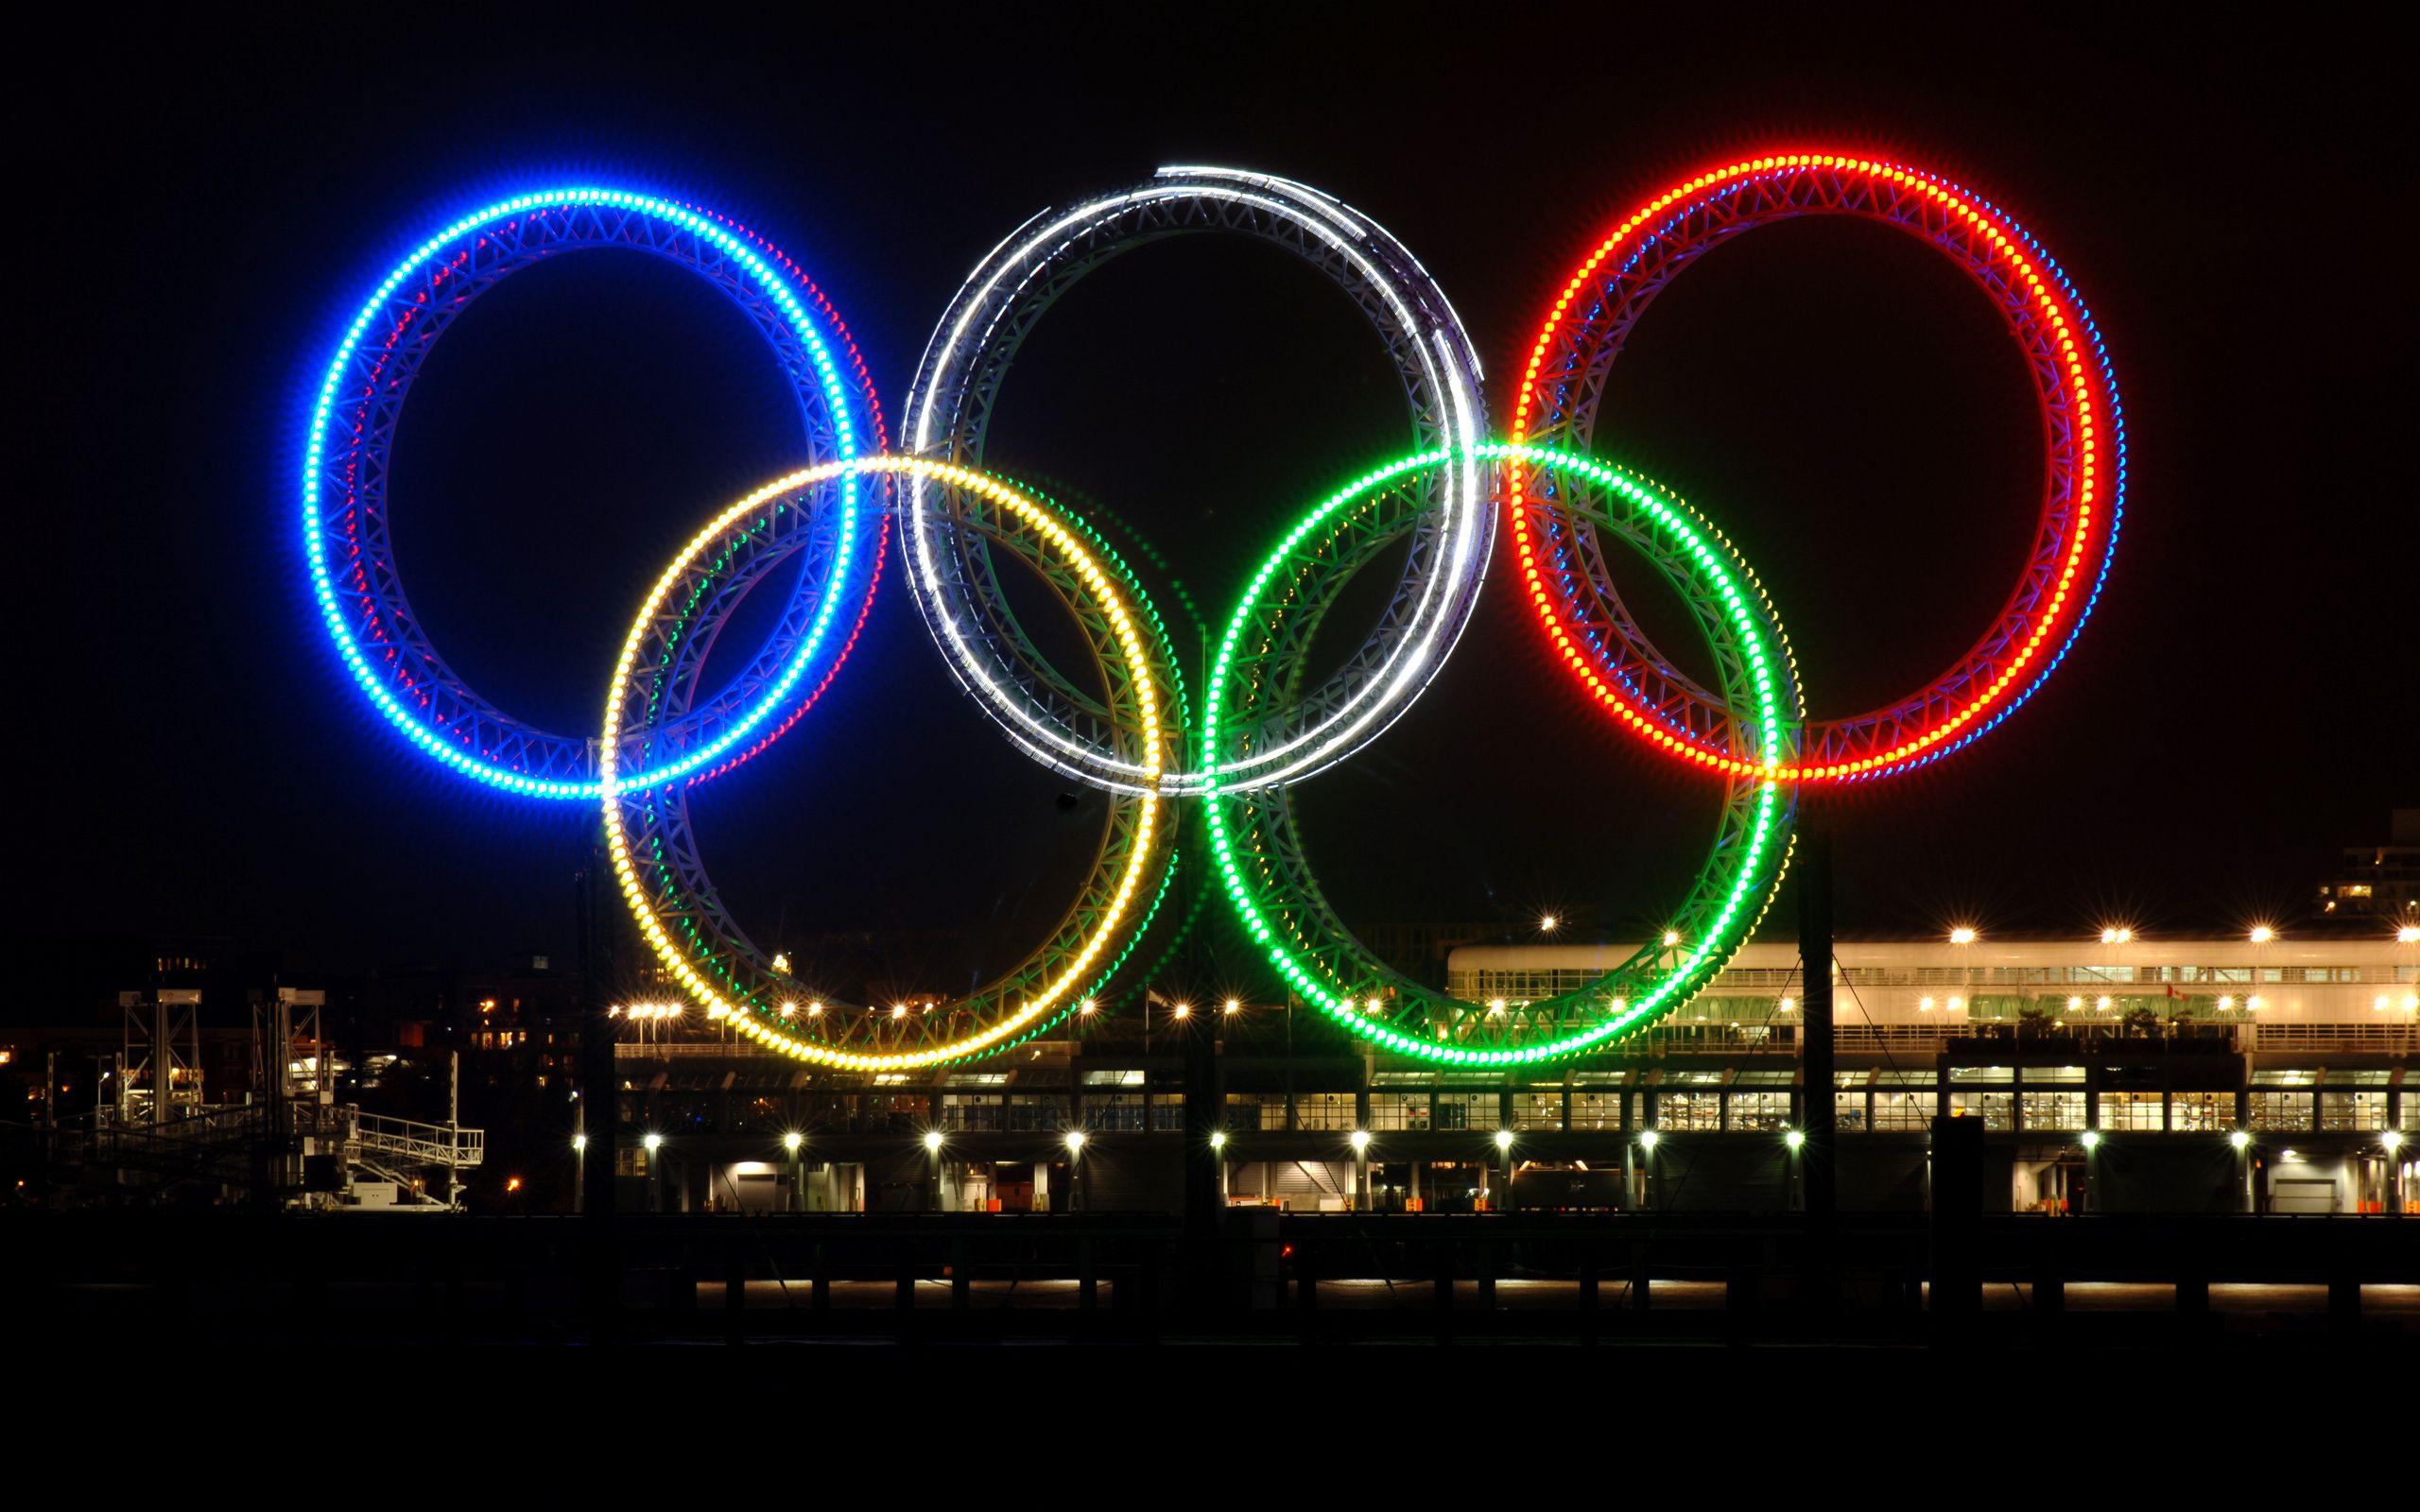 Olympic Games Wallpapers Top Free Olympic Games Backgrounds